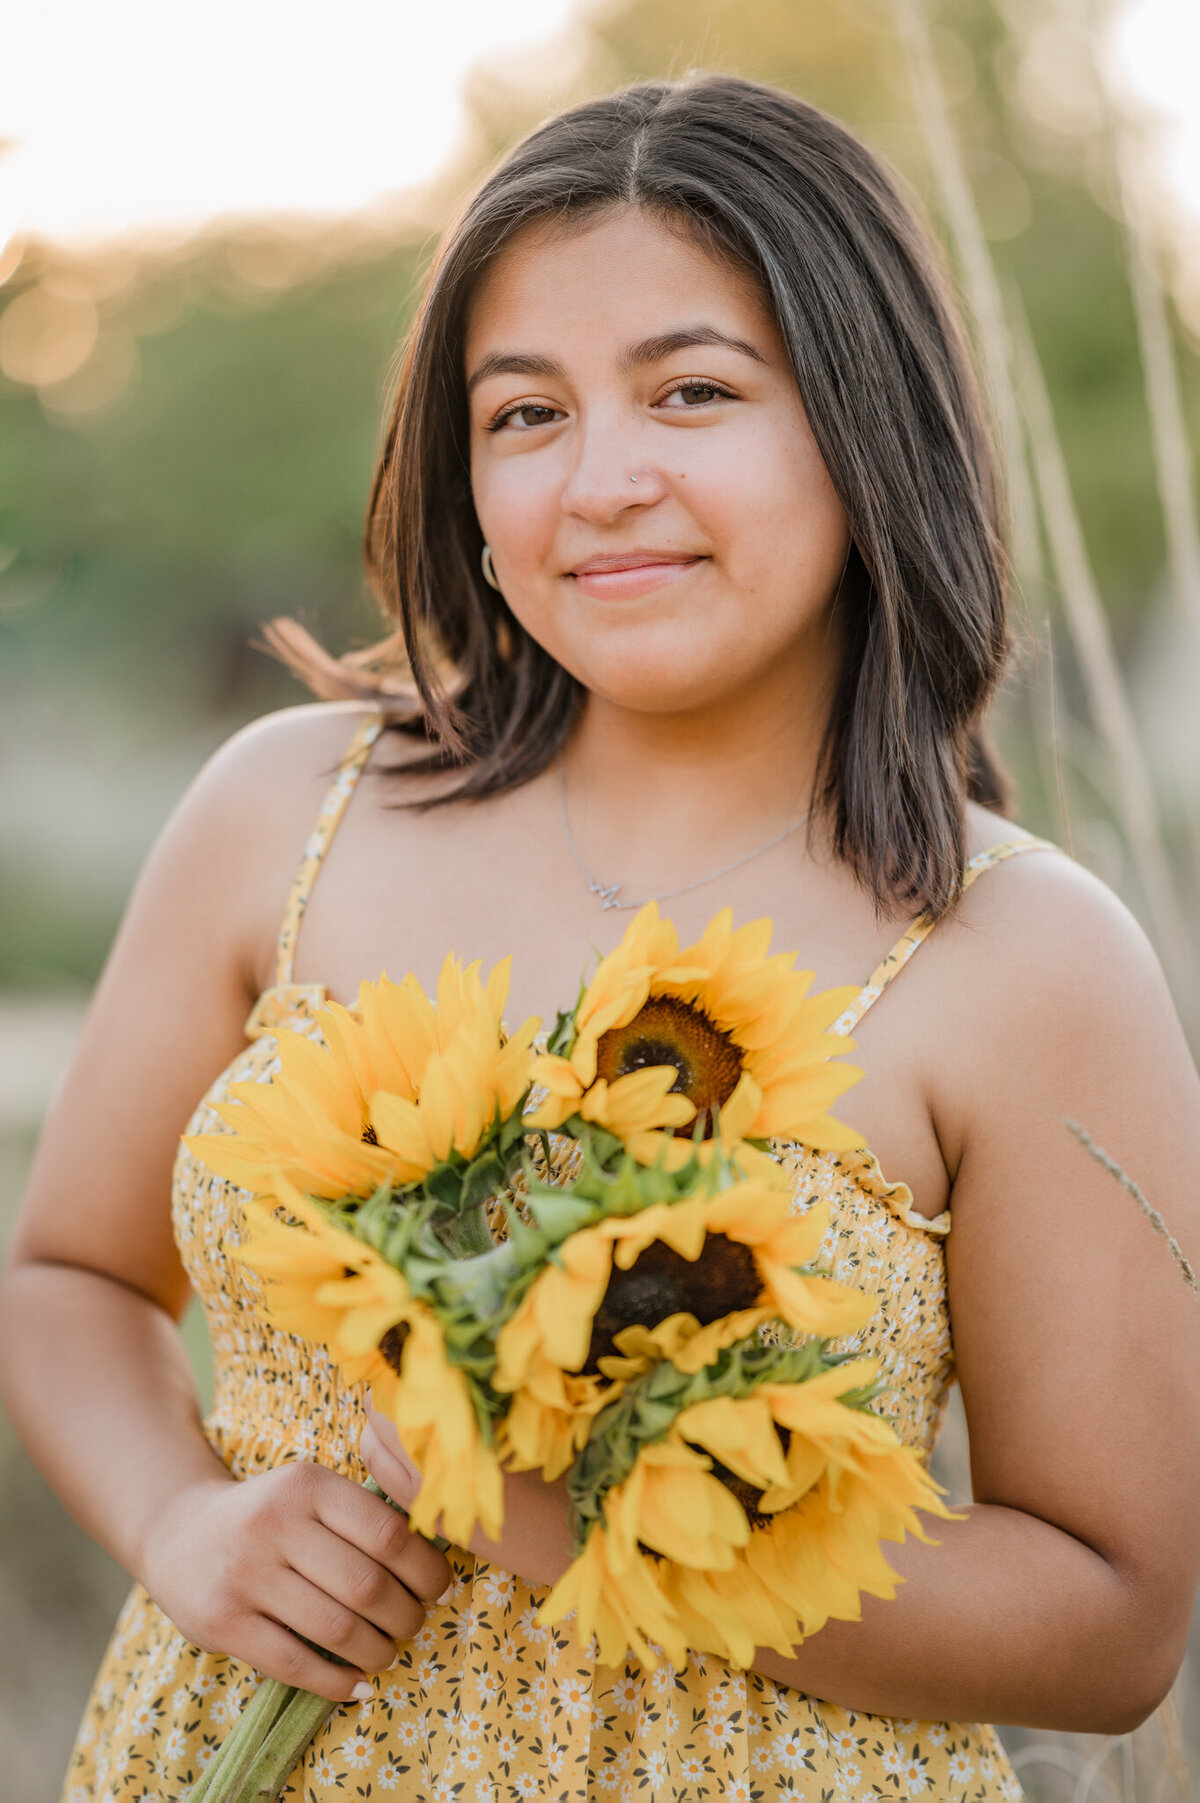 Senior portrait of a girl in a yellow dress holding sunflowers in golden hour.